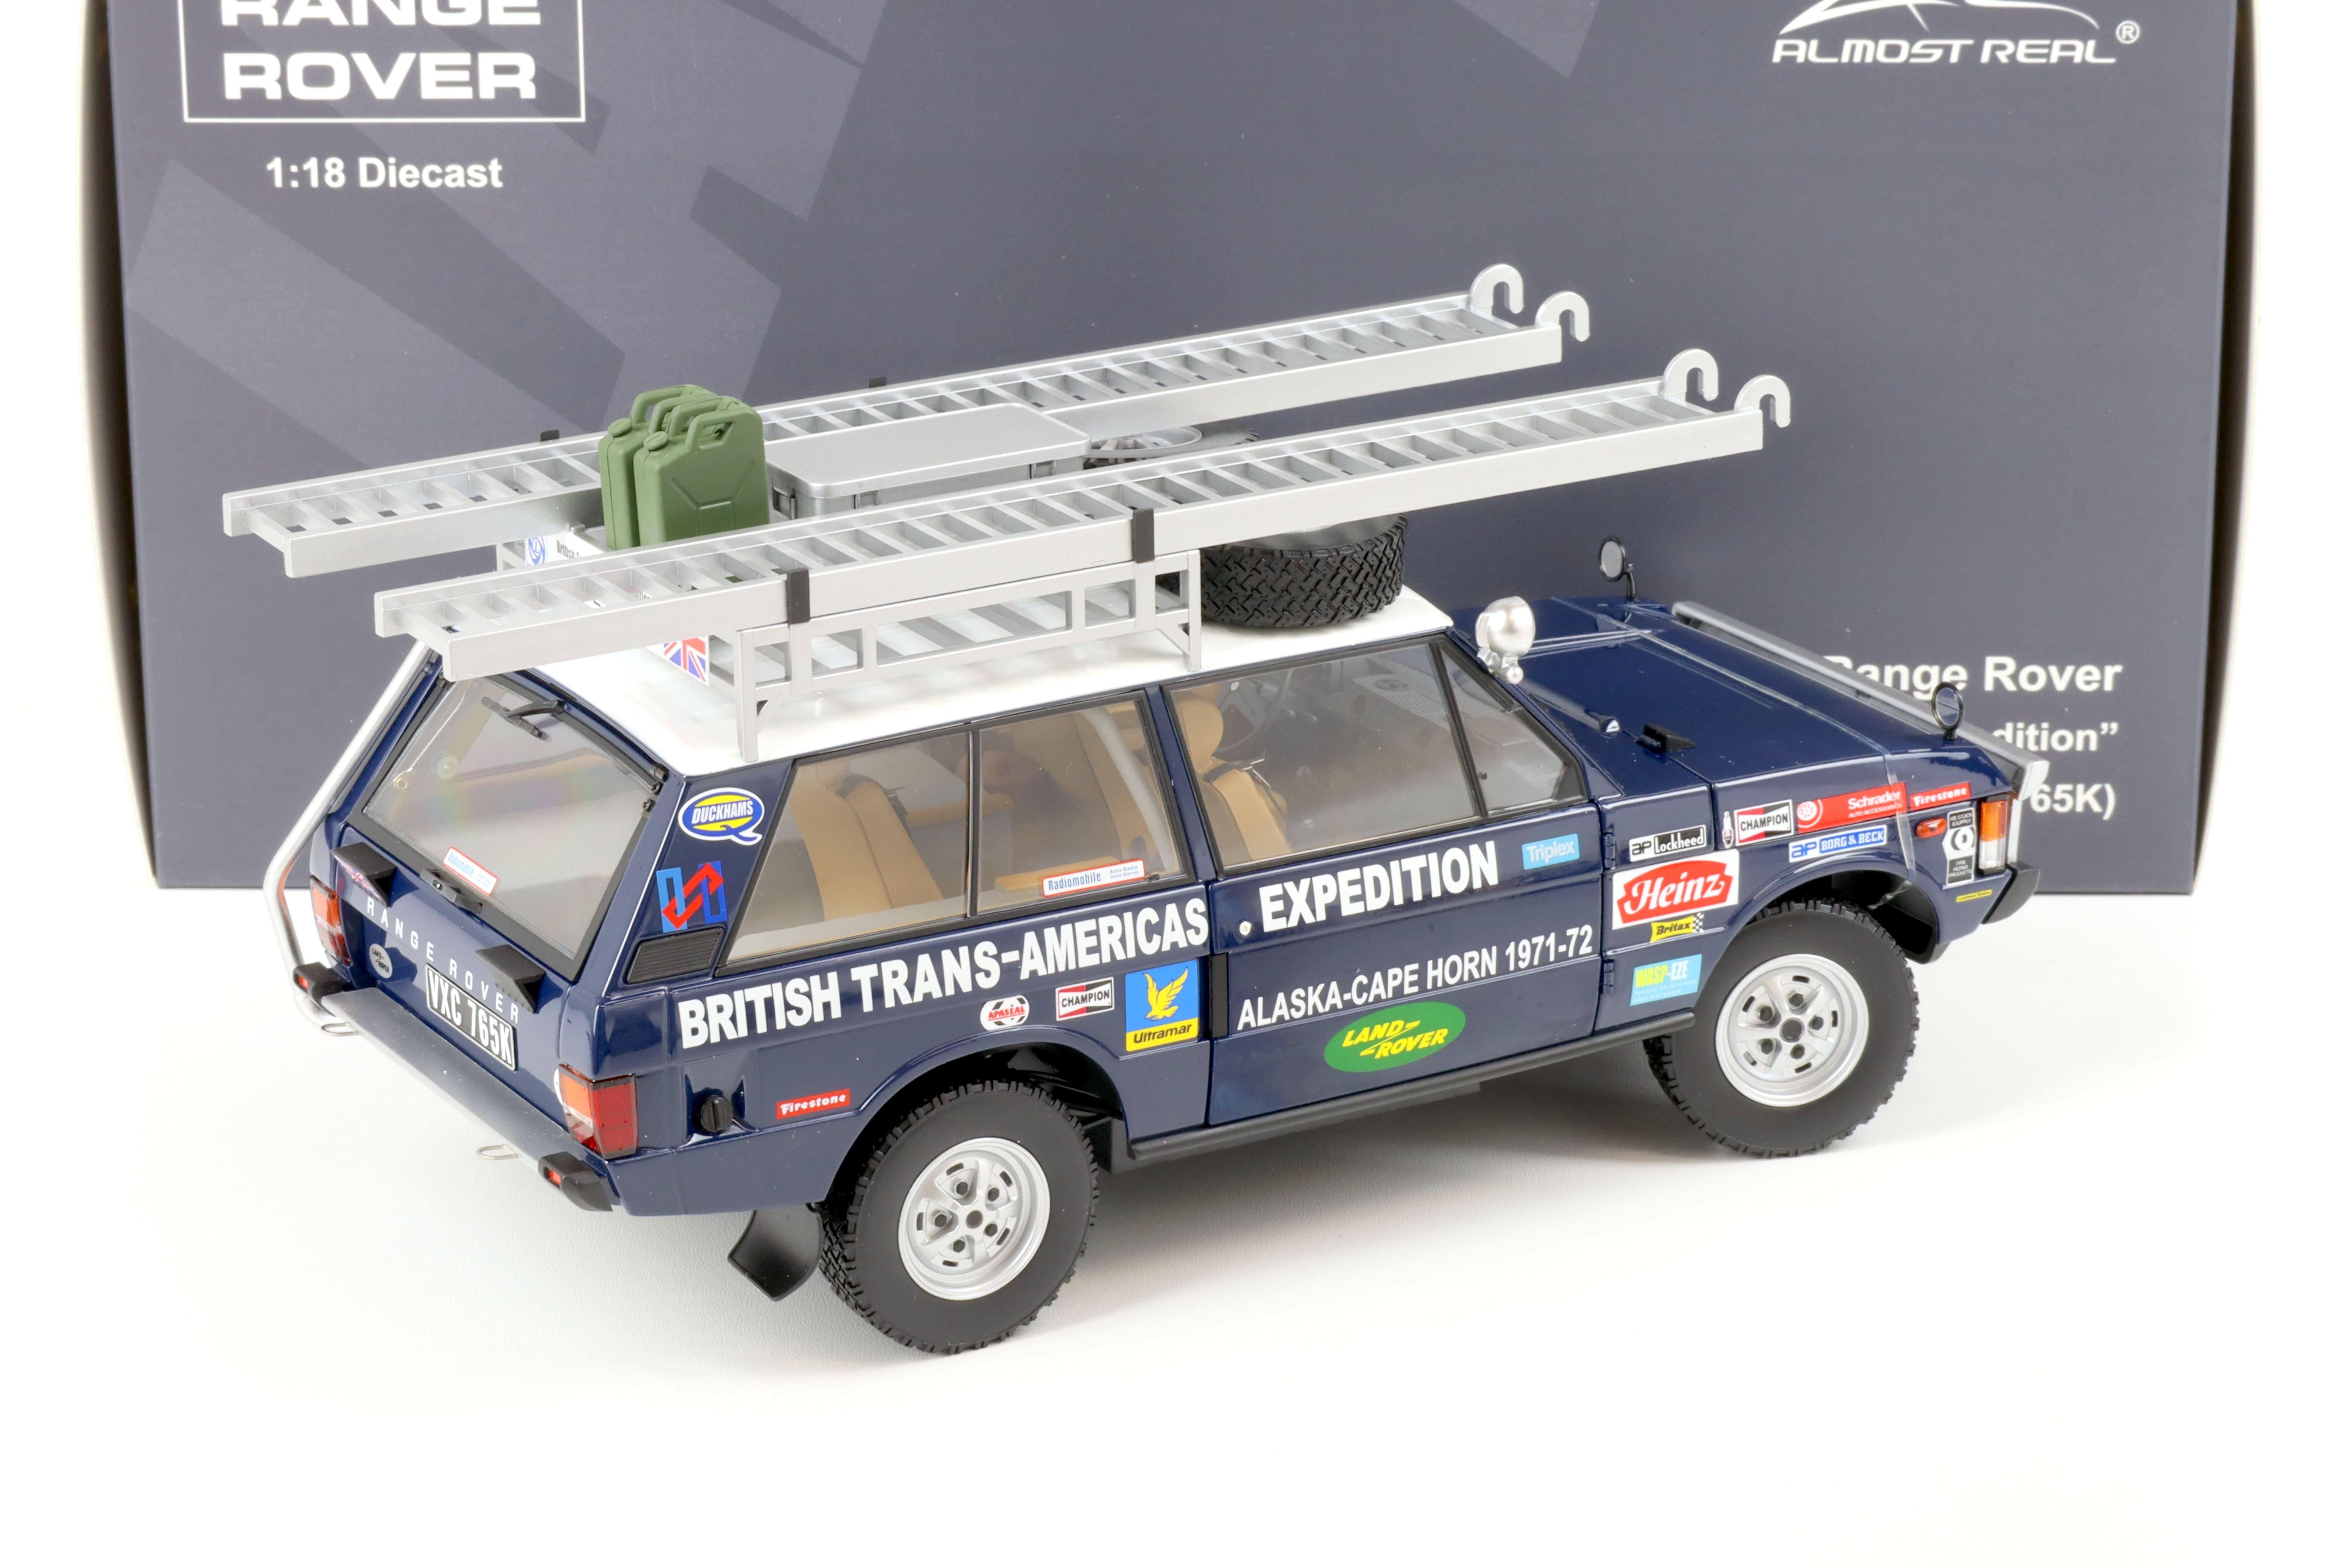 1:18 Almost Real Land Rover Range Rover Trans-Americans Expedition 765K 1971-72